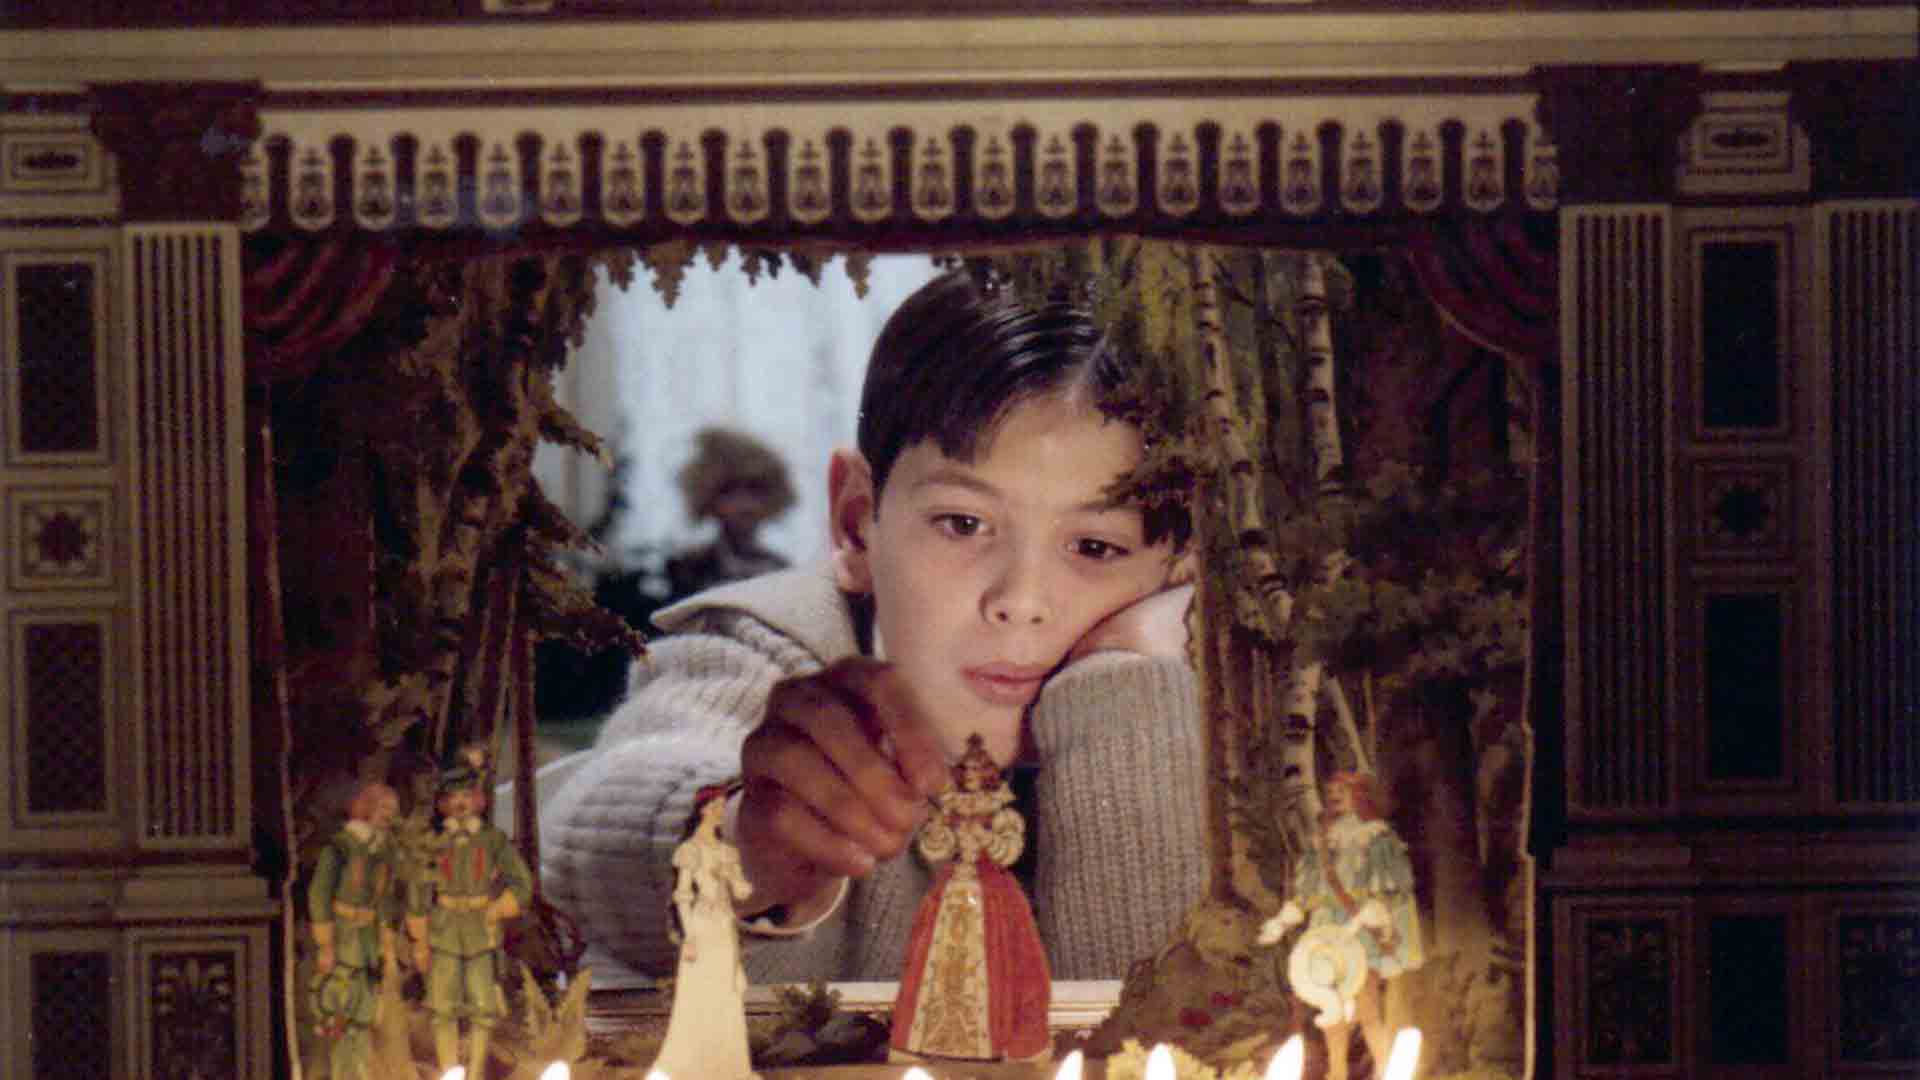 A child playing with a sculpture in the movie Fanny and Alexander